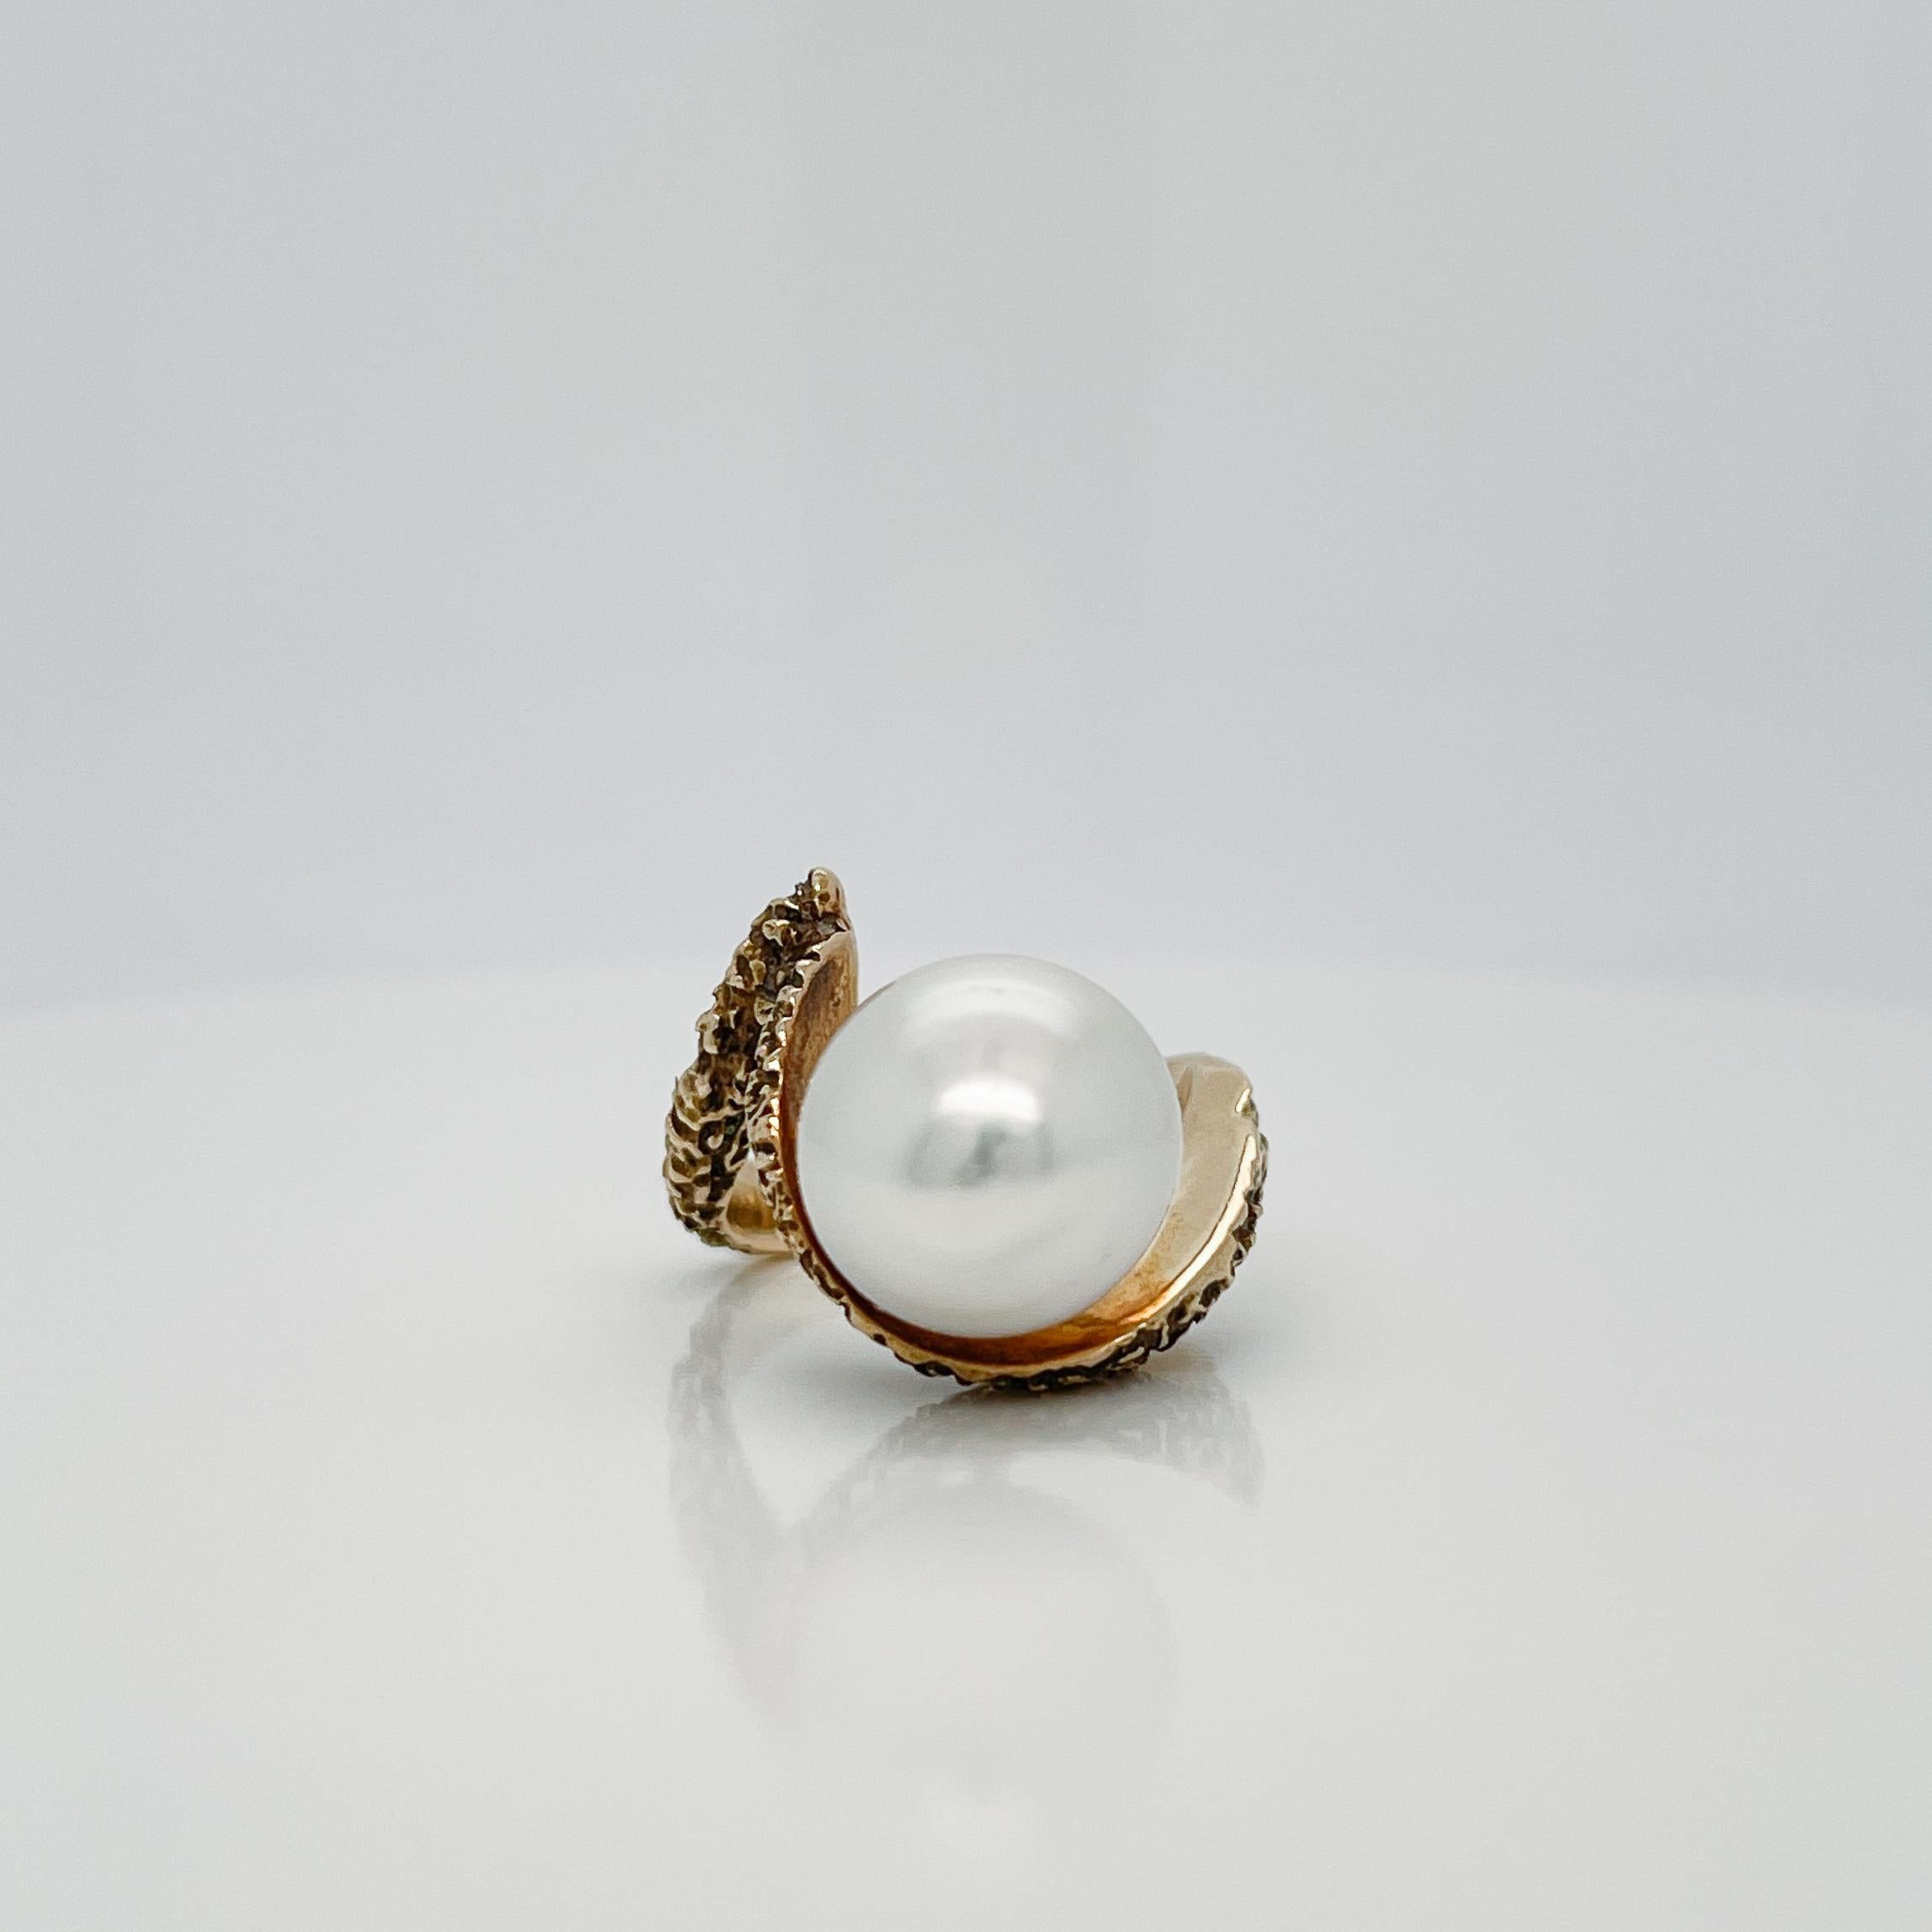 Vintage Brutalist Textured 14 Karat Yellow Gold & Baroque Pearl Cocktail Ring For Sale 5